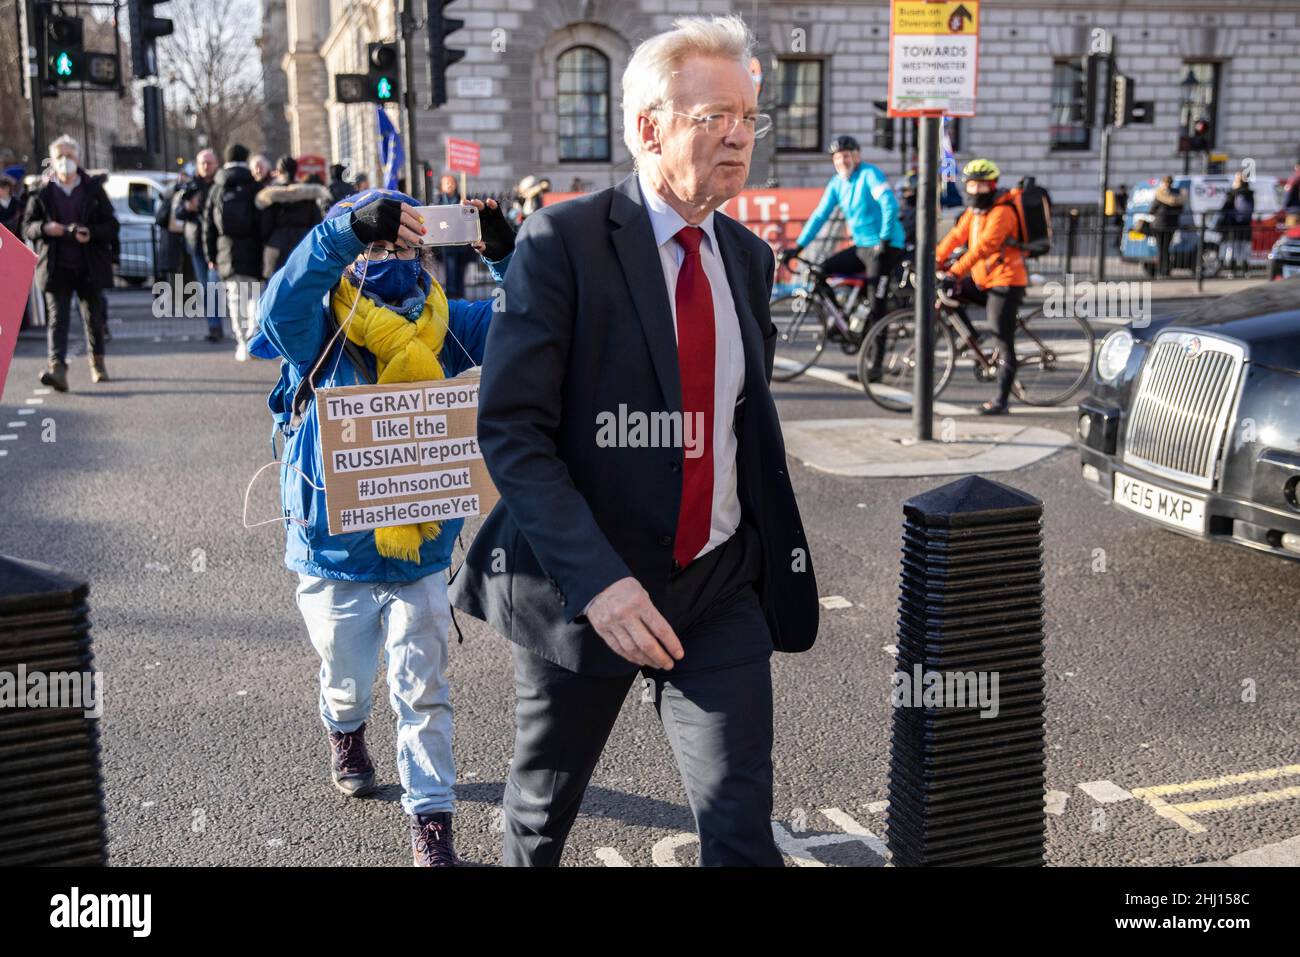 Protesters target Conservative MP David Davis outside Houses of parliament on the day that Boris Johnson faces further demands to resign, London, UK Whitehall, London, England, UK 26th January 2022 Credit: Jeff Gilbert/Alamy Live News Stock Photo